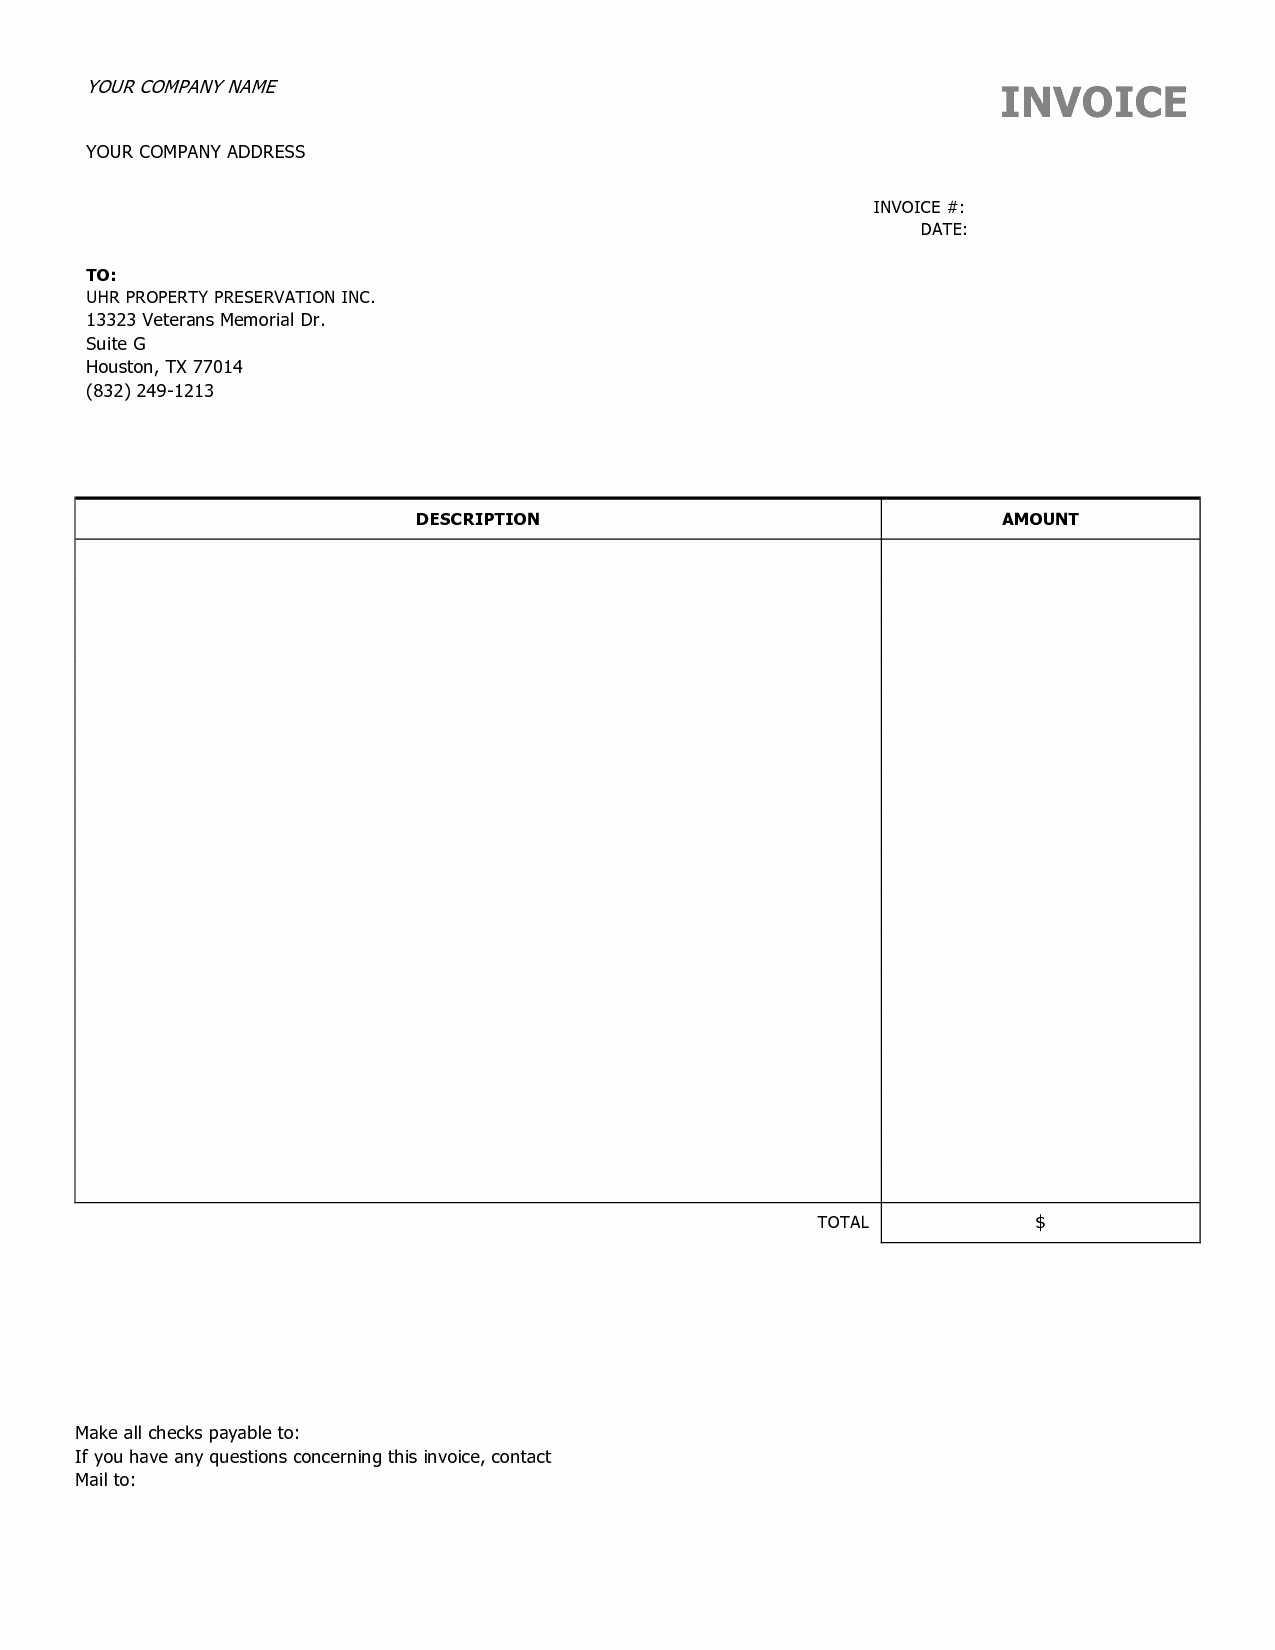 Free Downloadable Invoice Template Inspirational Free Printable Contractor Invoice